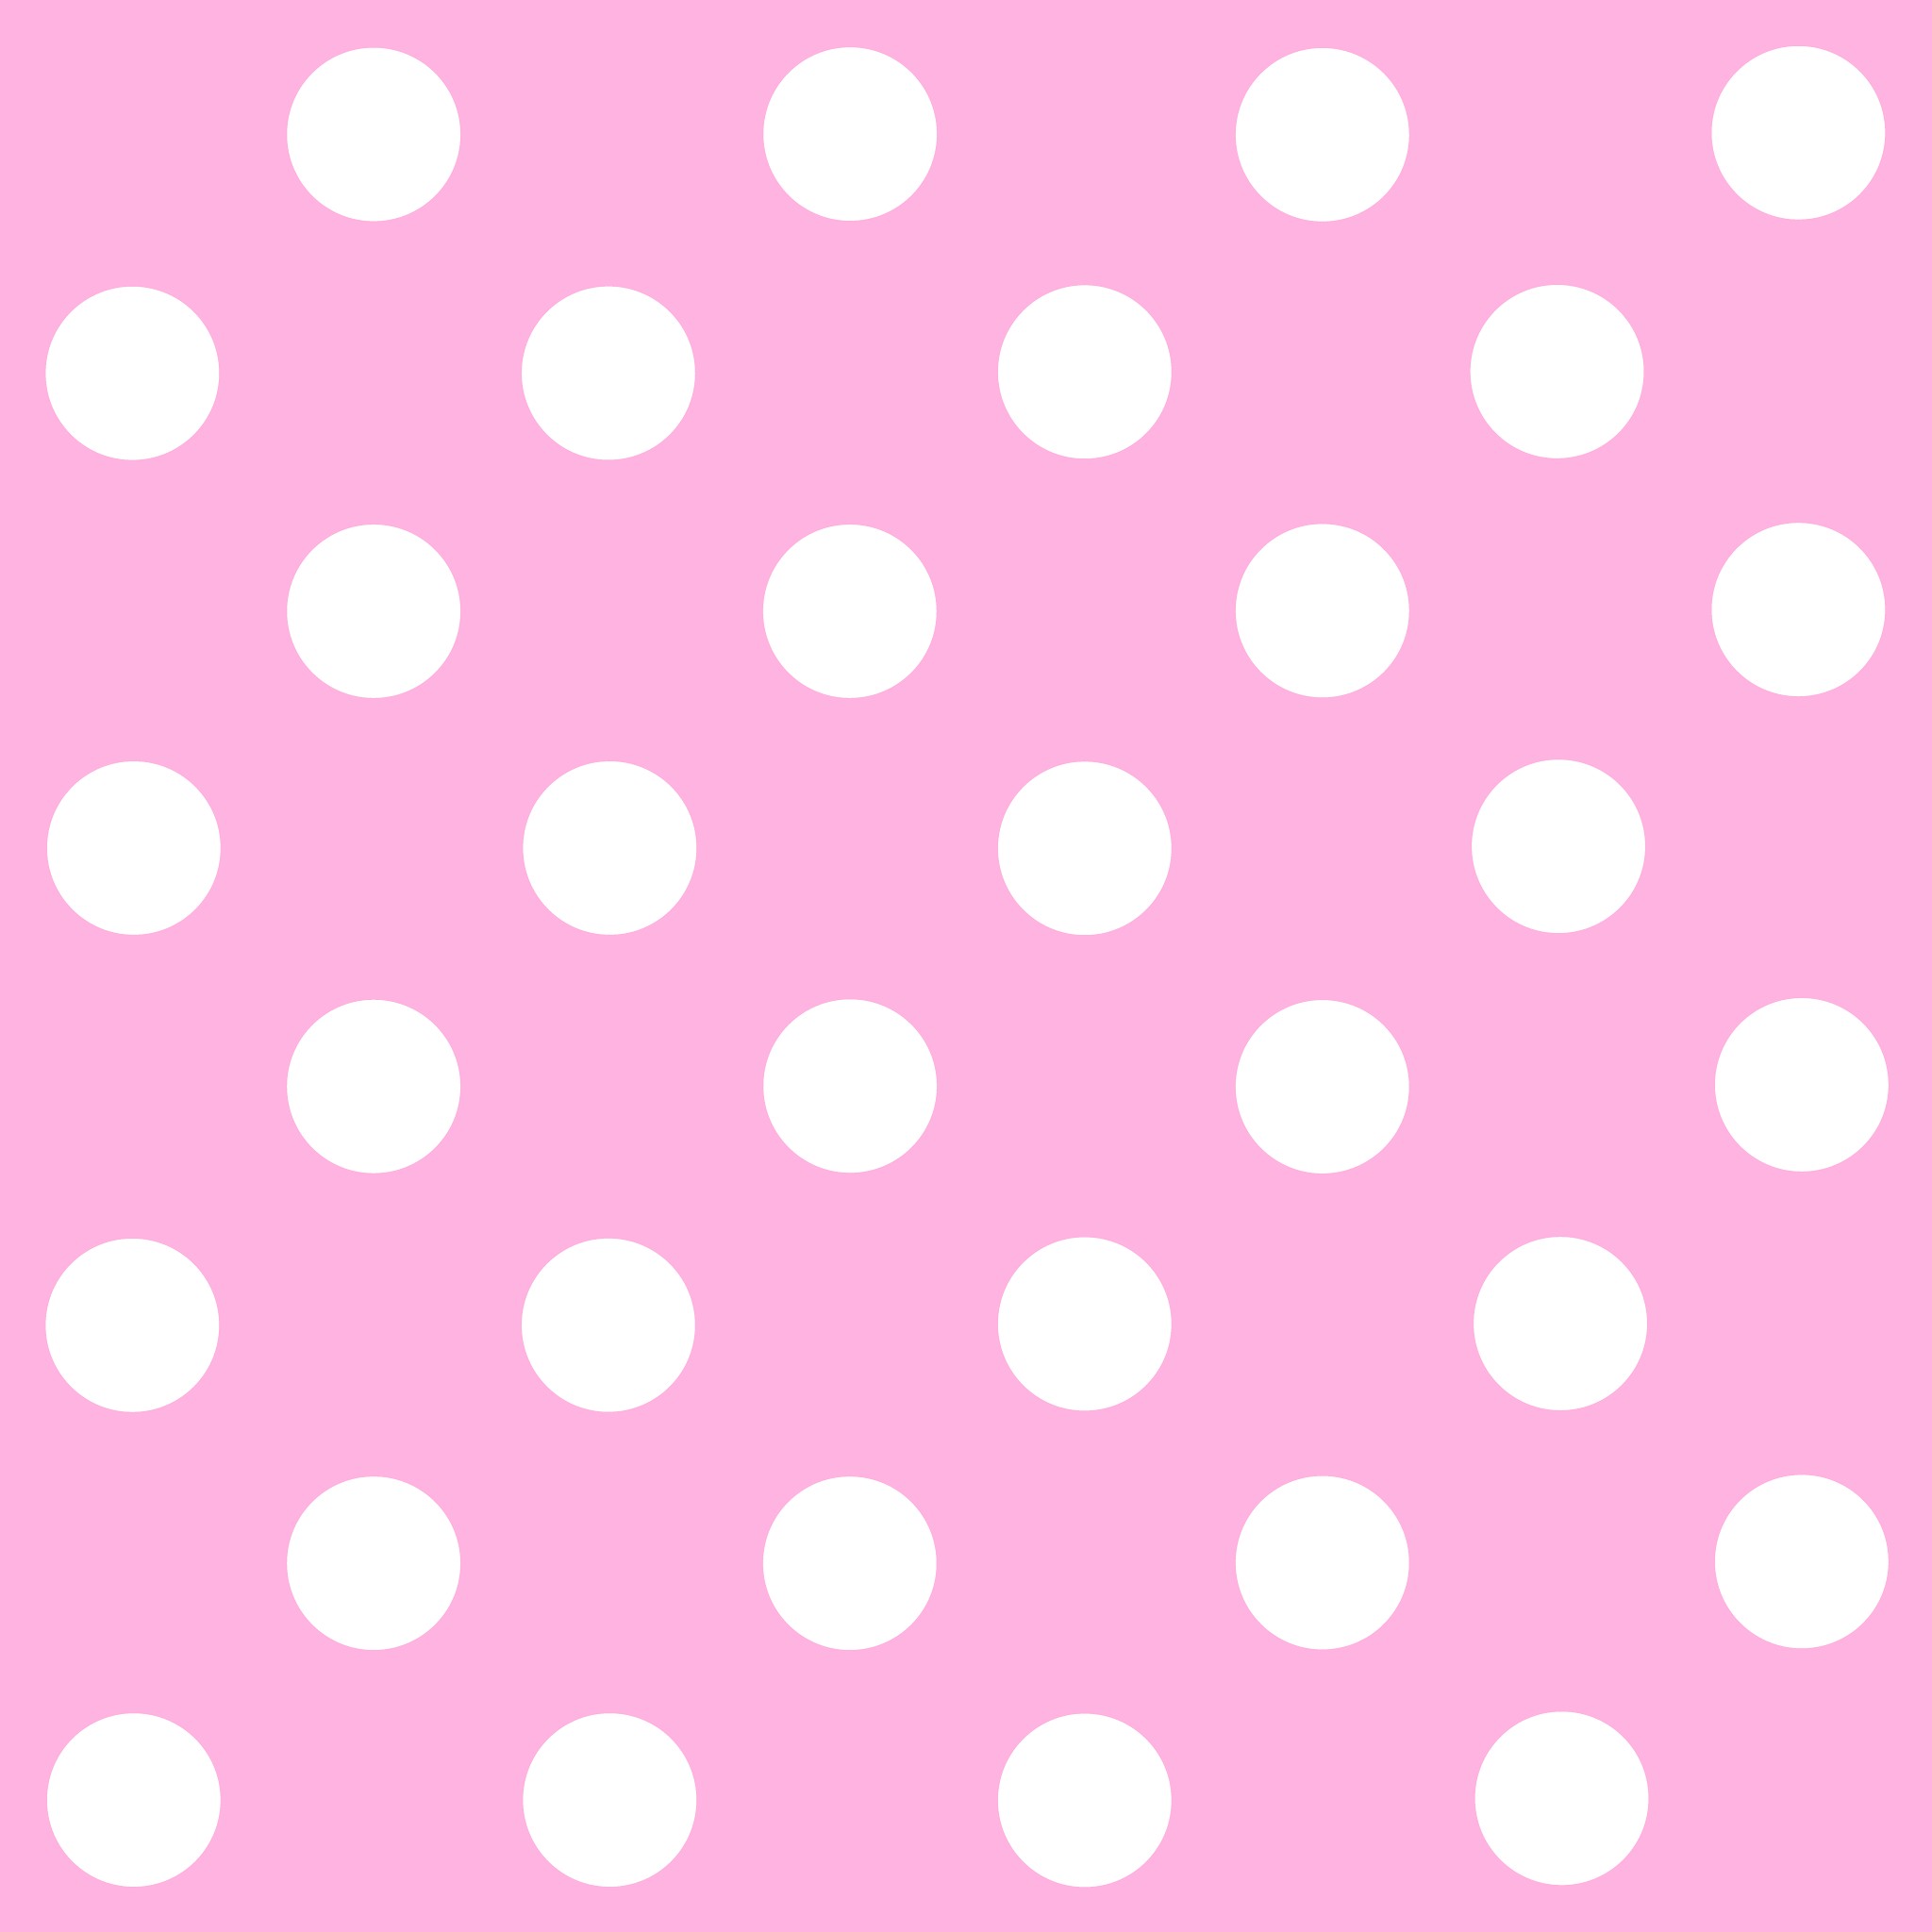 Pink Polka Dot background ·① Download free amazing full HD backgrounds ...